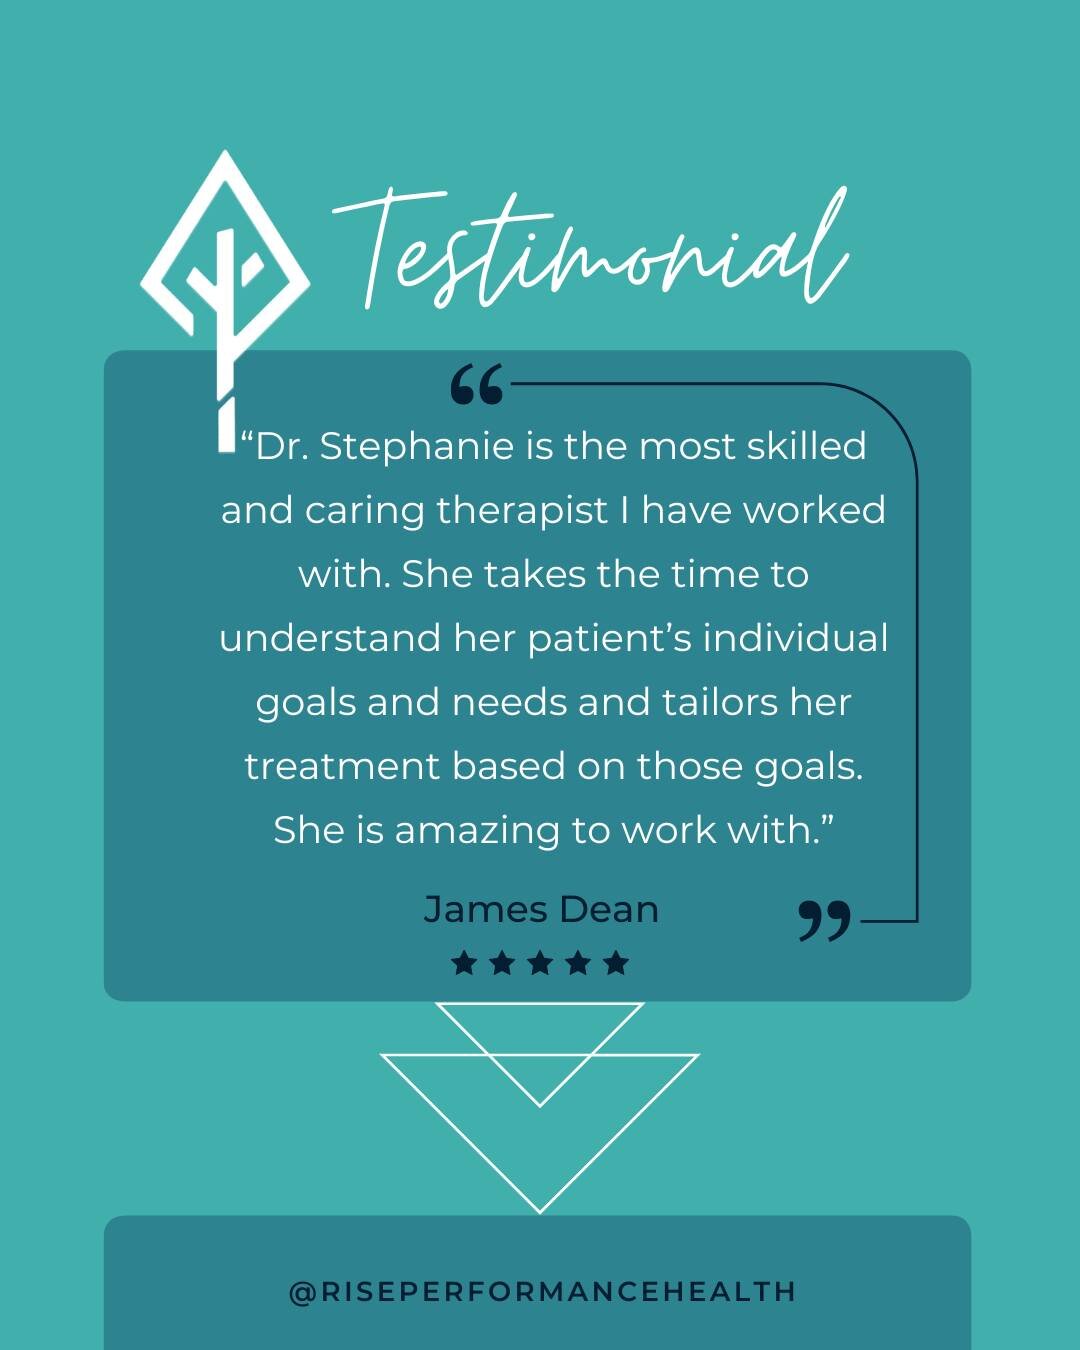 &quot;Dr. Stephanie is the most skilled and caring therapist I have worked with. She takes the time to understand her patient&rsquo;s individual goals and needs and tailors her treatment based on those goals. She is amazing to work with. - James Dean